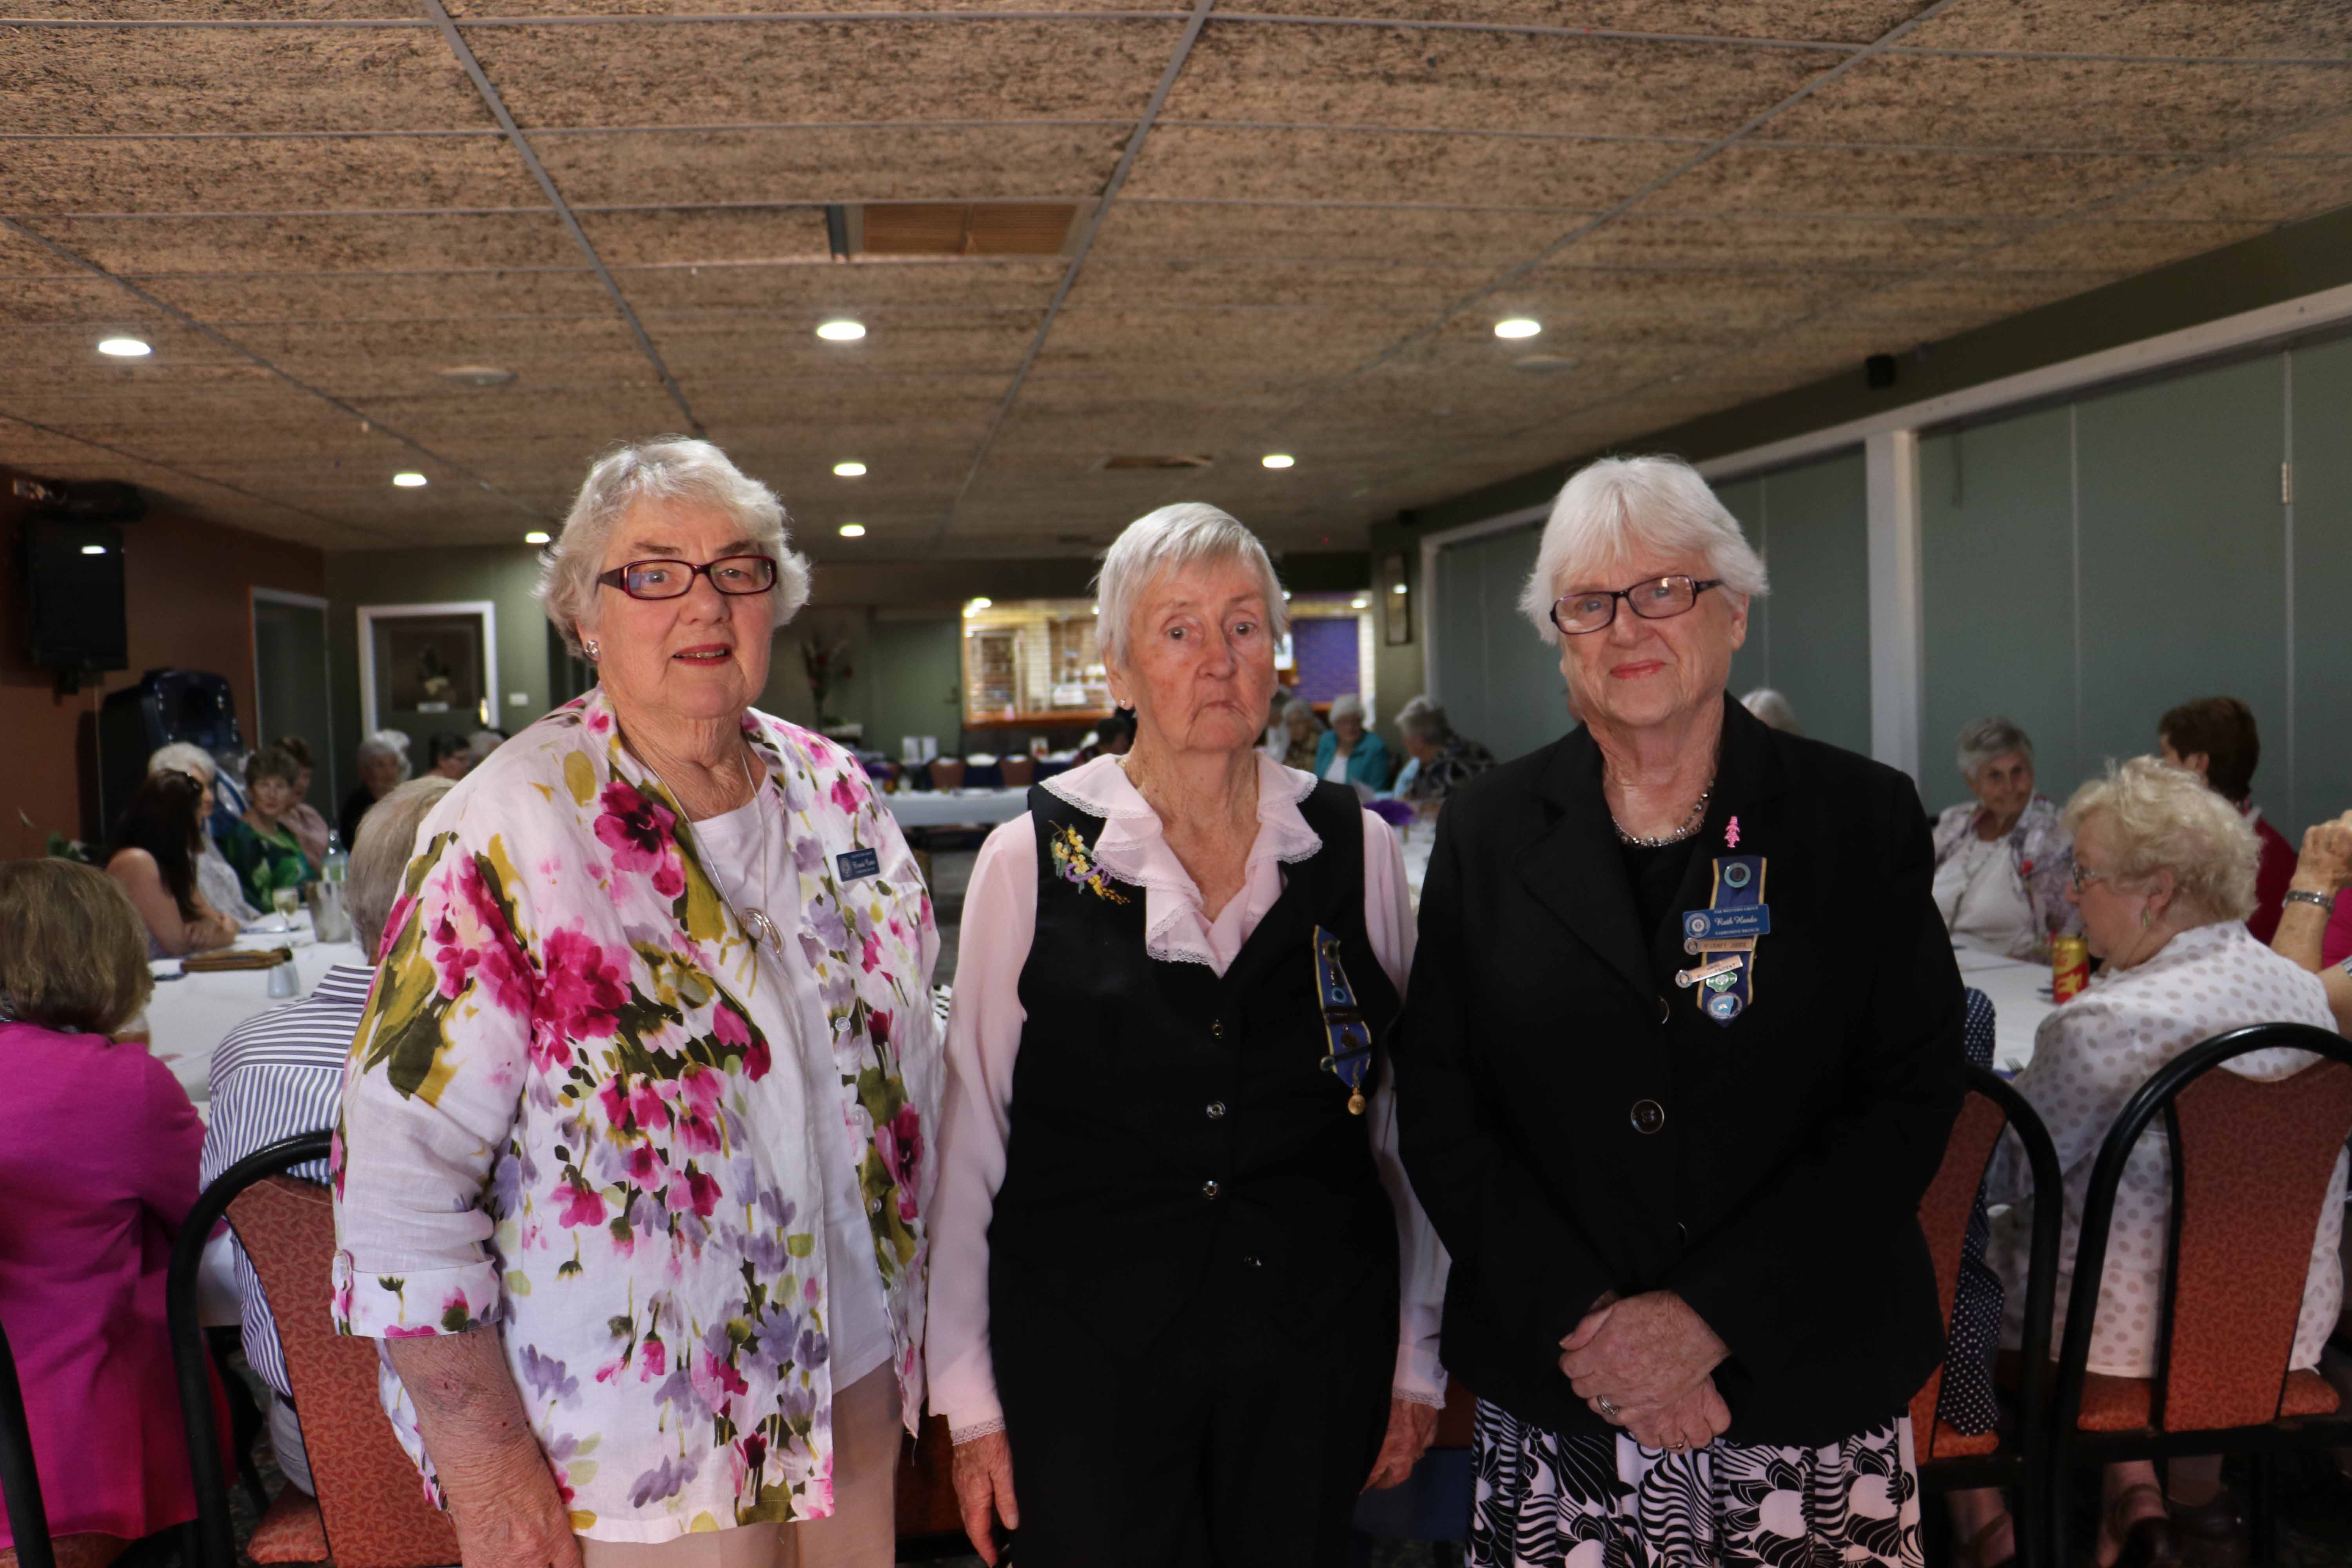 CWA Cobar Branch president Marie Hudson (at centre) welcomed Narromine guests Brenda Carter and Ruth Hando from the CWA Far West Group along with numerous other guests for the branch’s 90 year anniversary celebration luncheon on Saturday at the Services Club. 